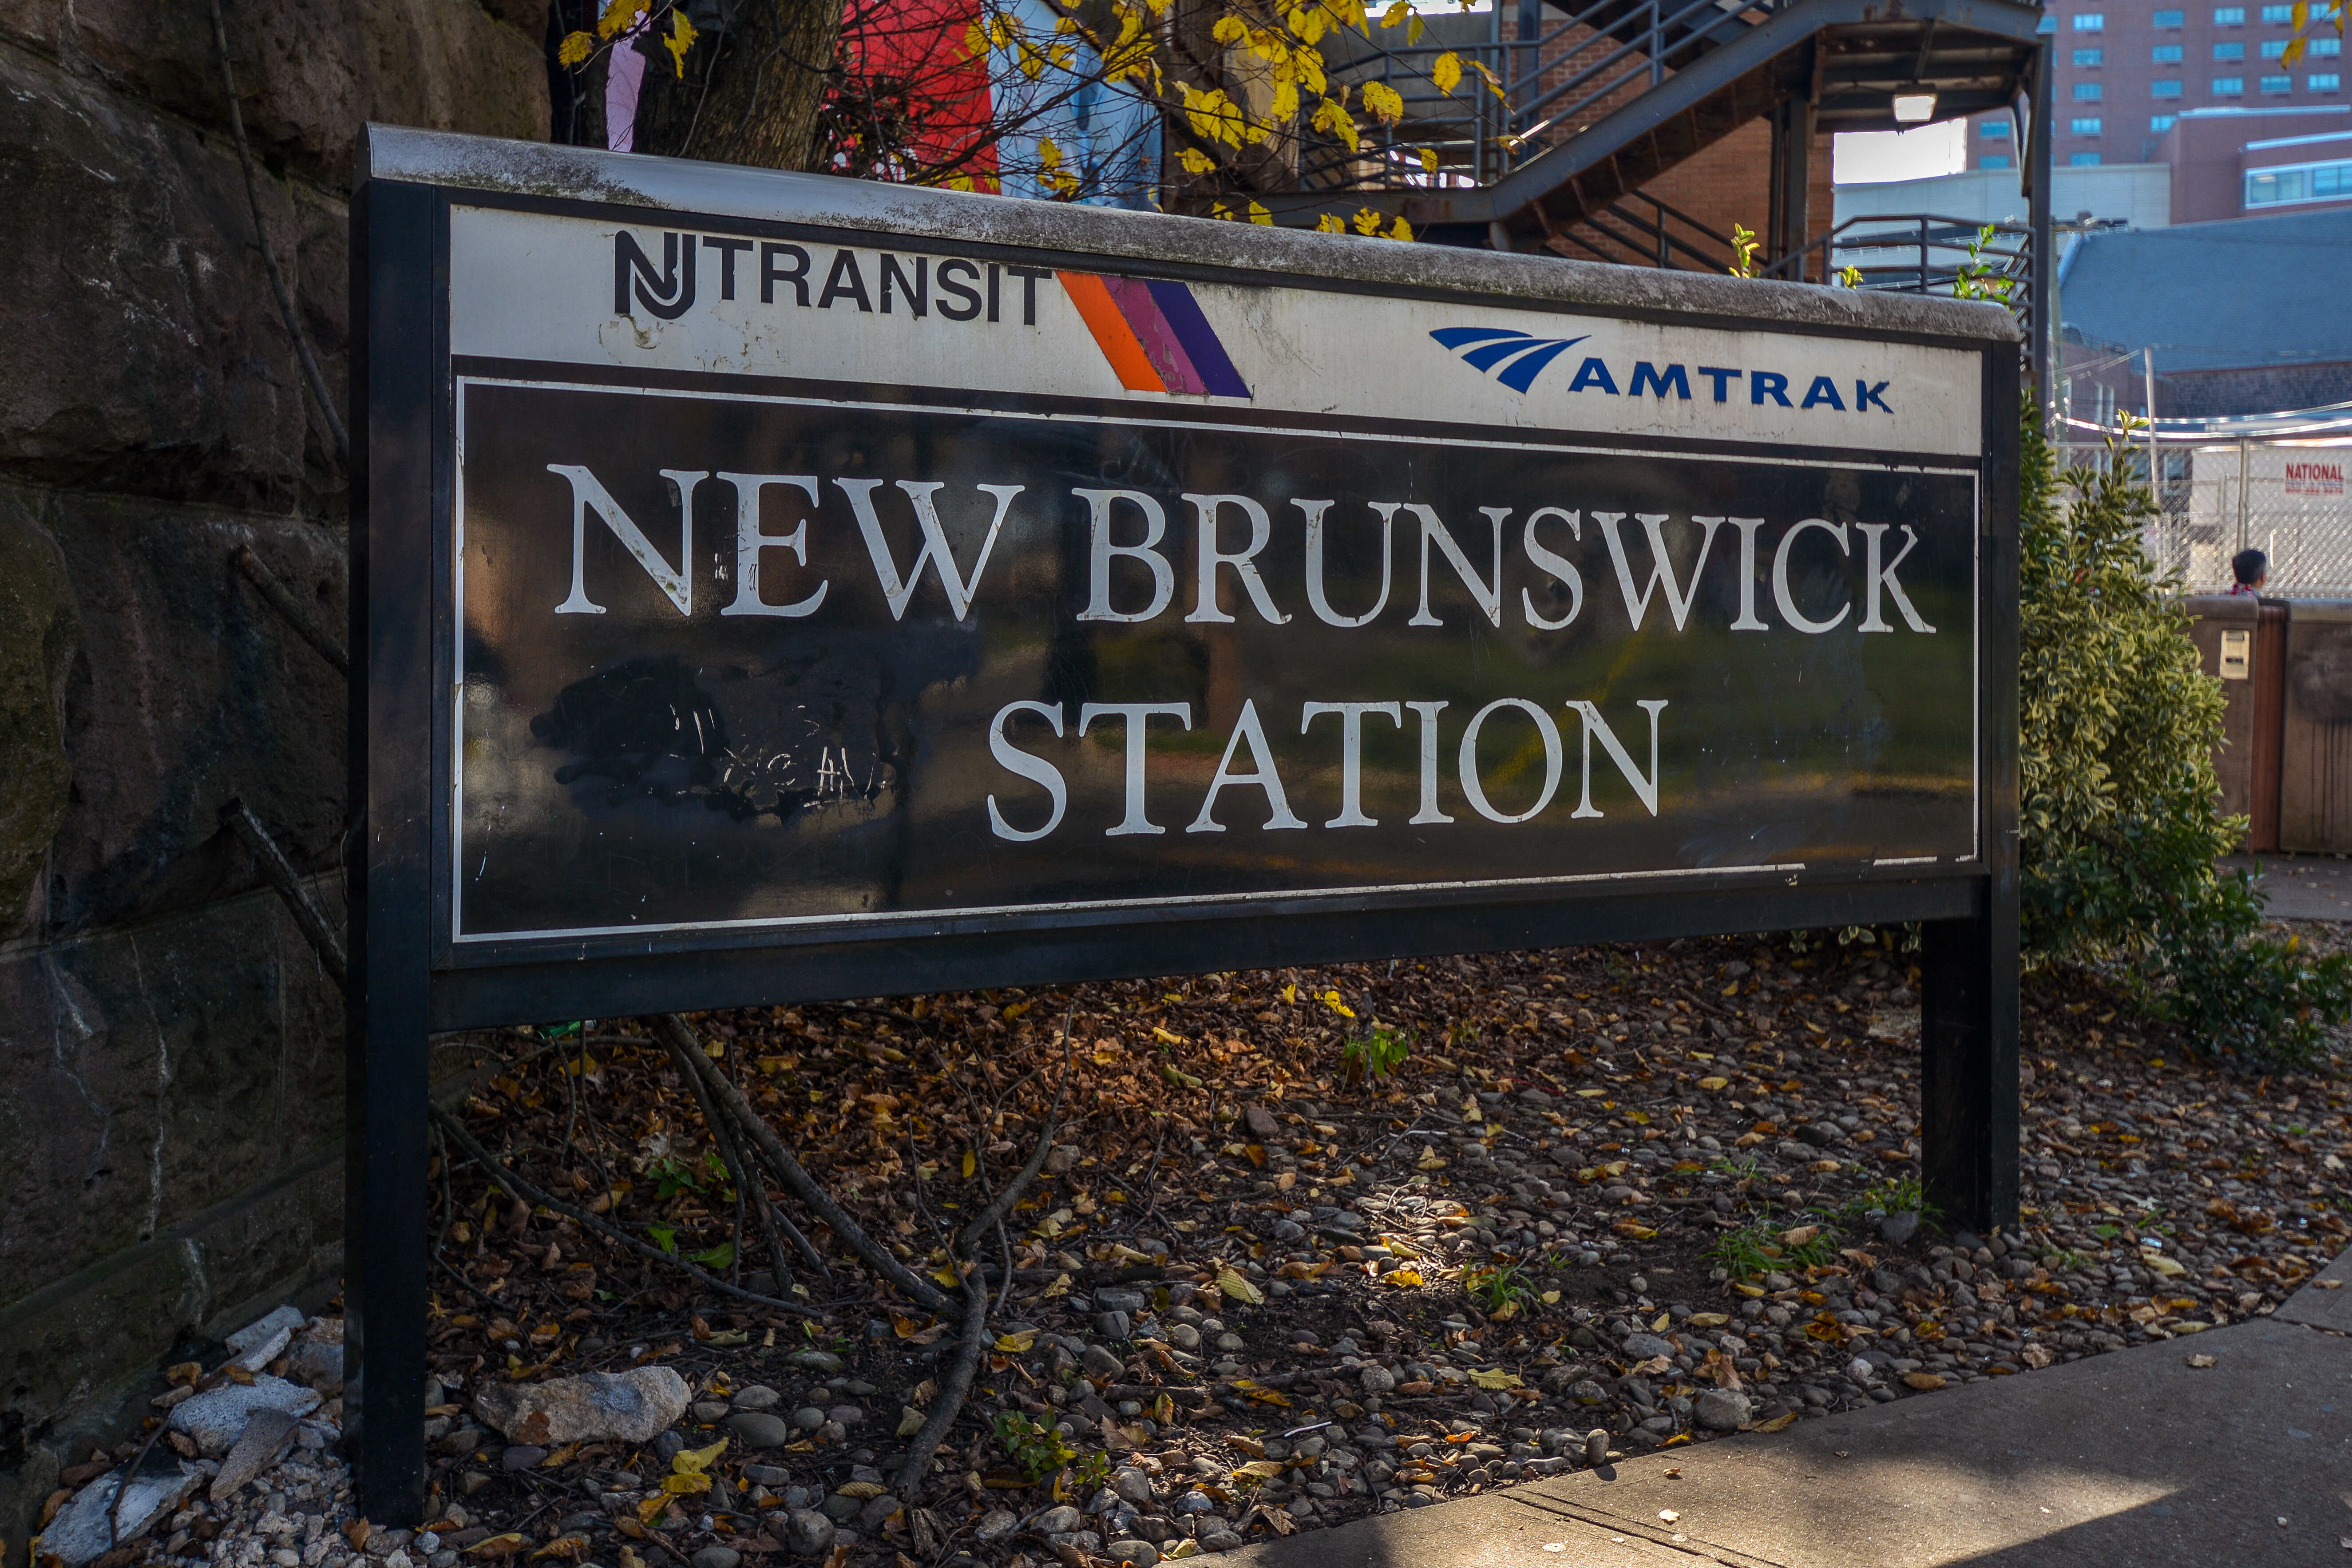 Sign for the New Brunswick Station near The Brunswick in New Brunswick, New Jersey